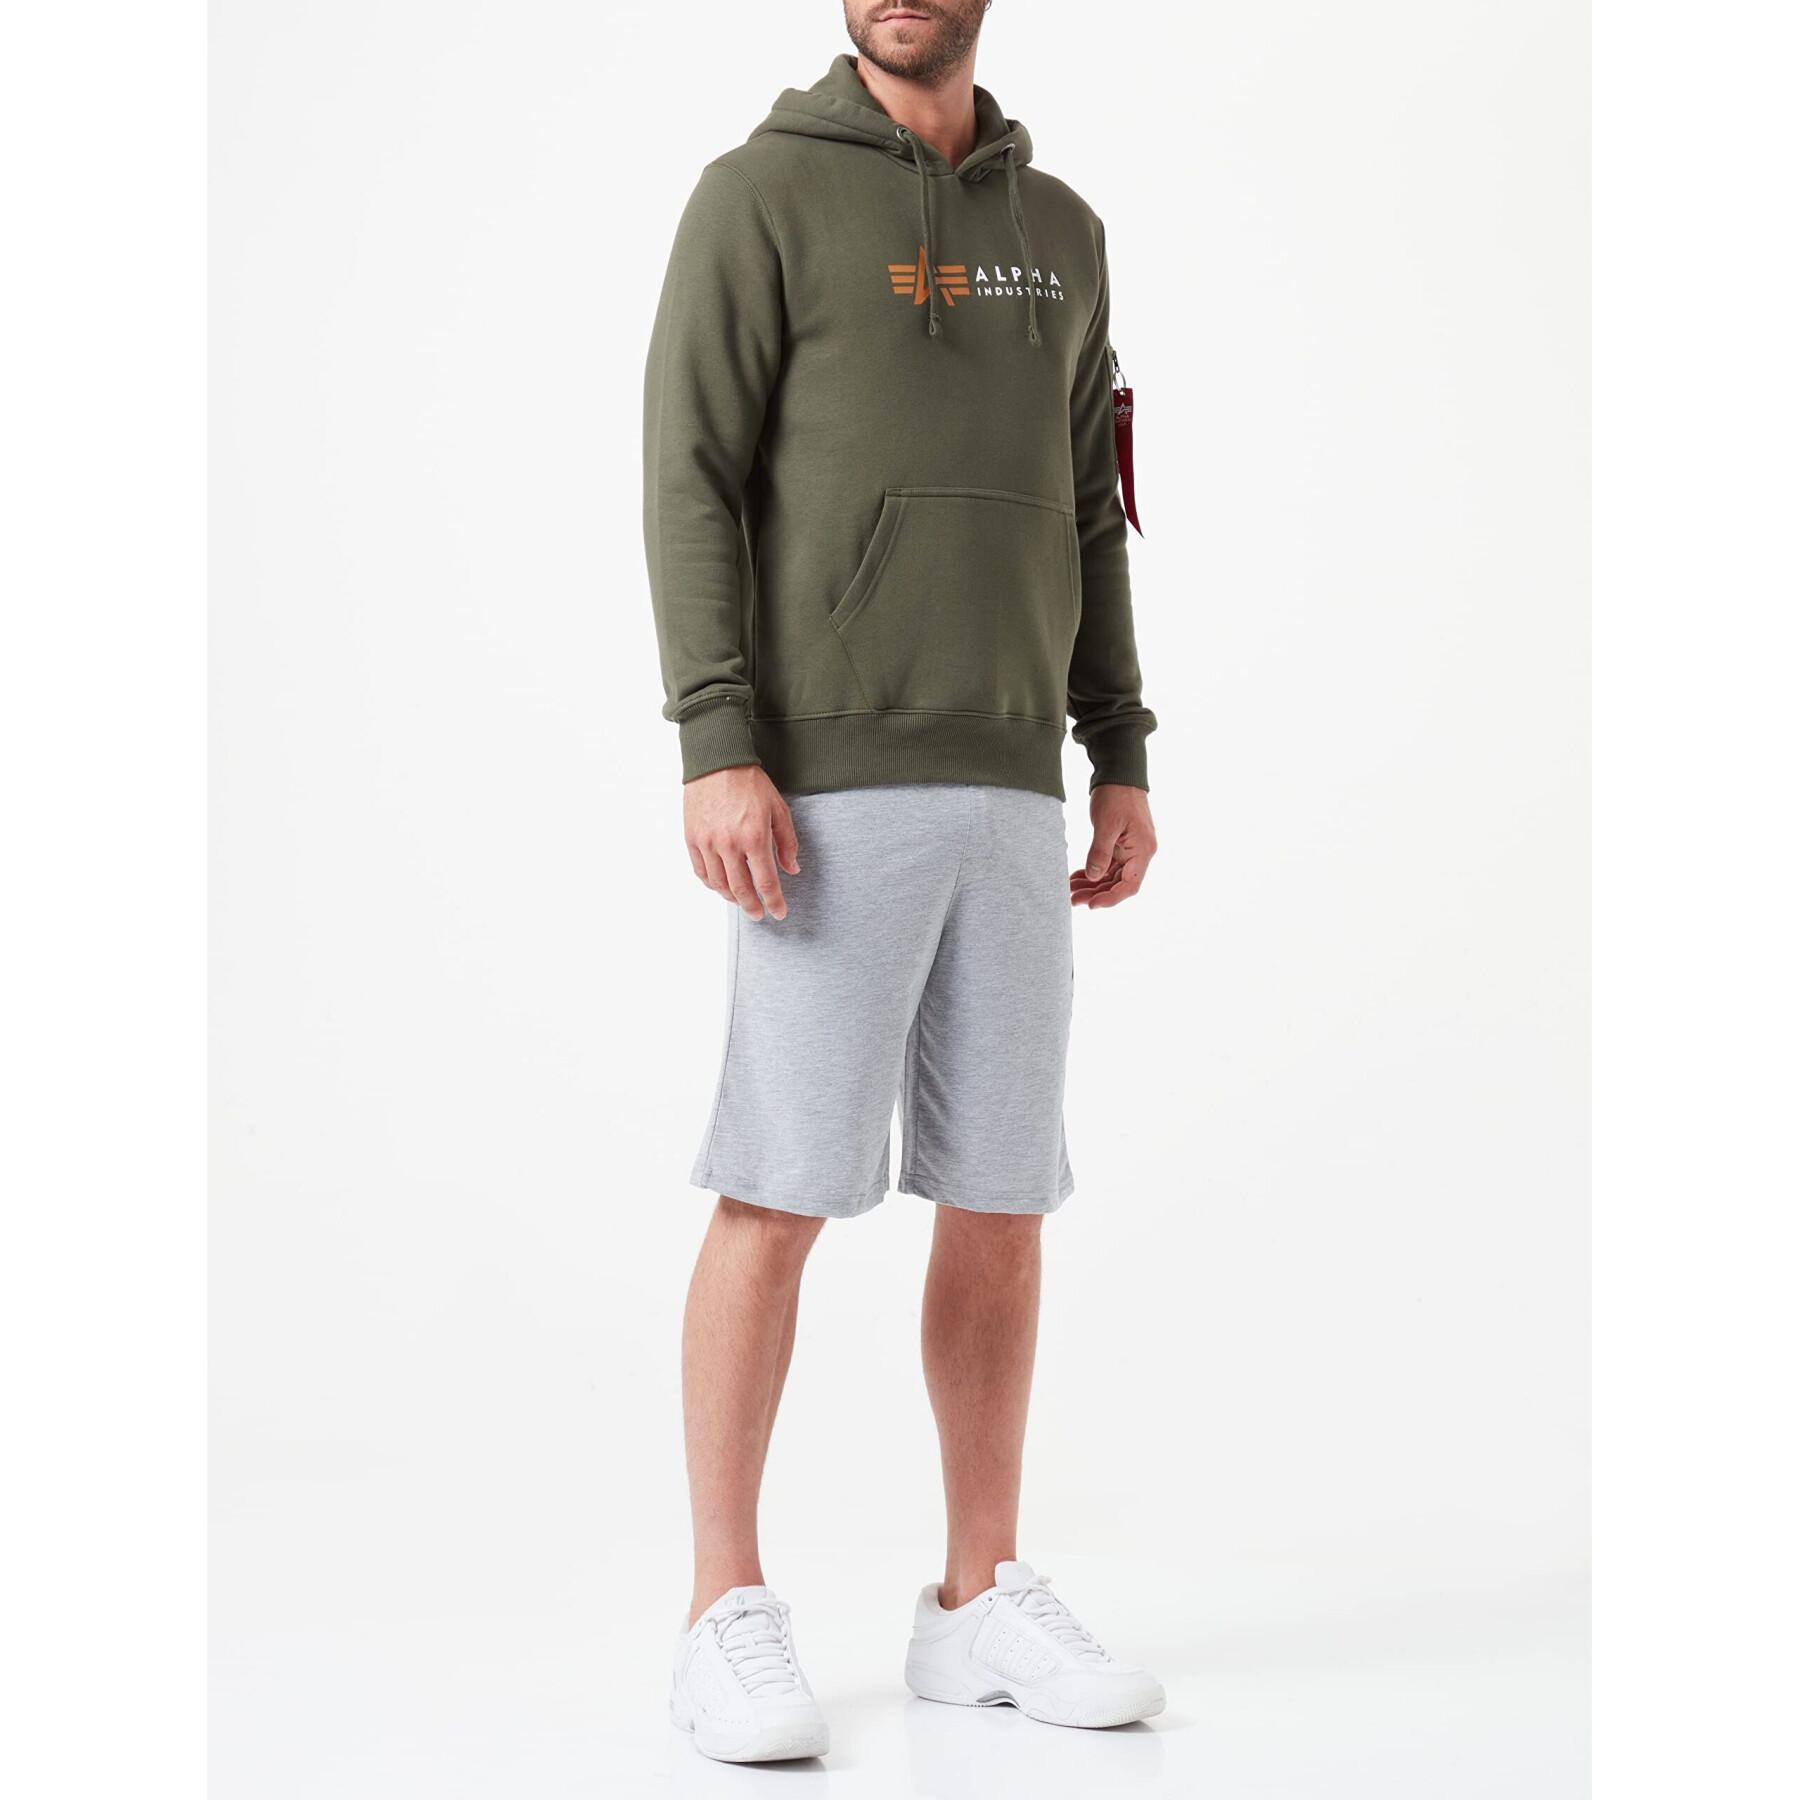 Sweat hooded Alpha Industries label